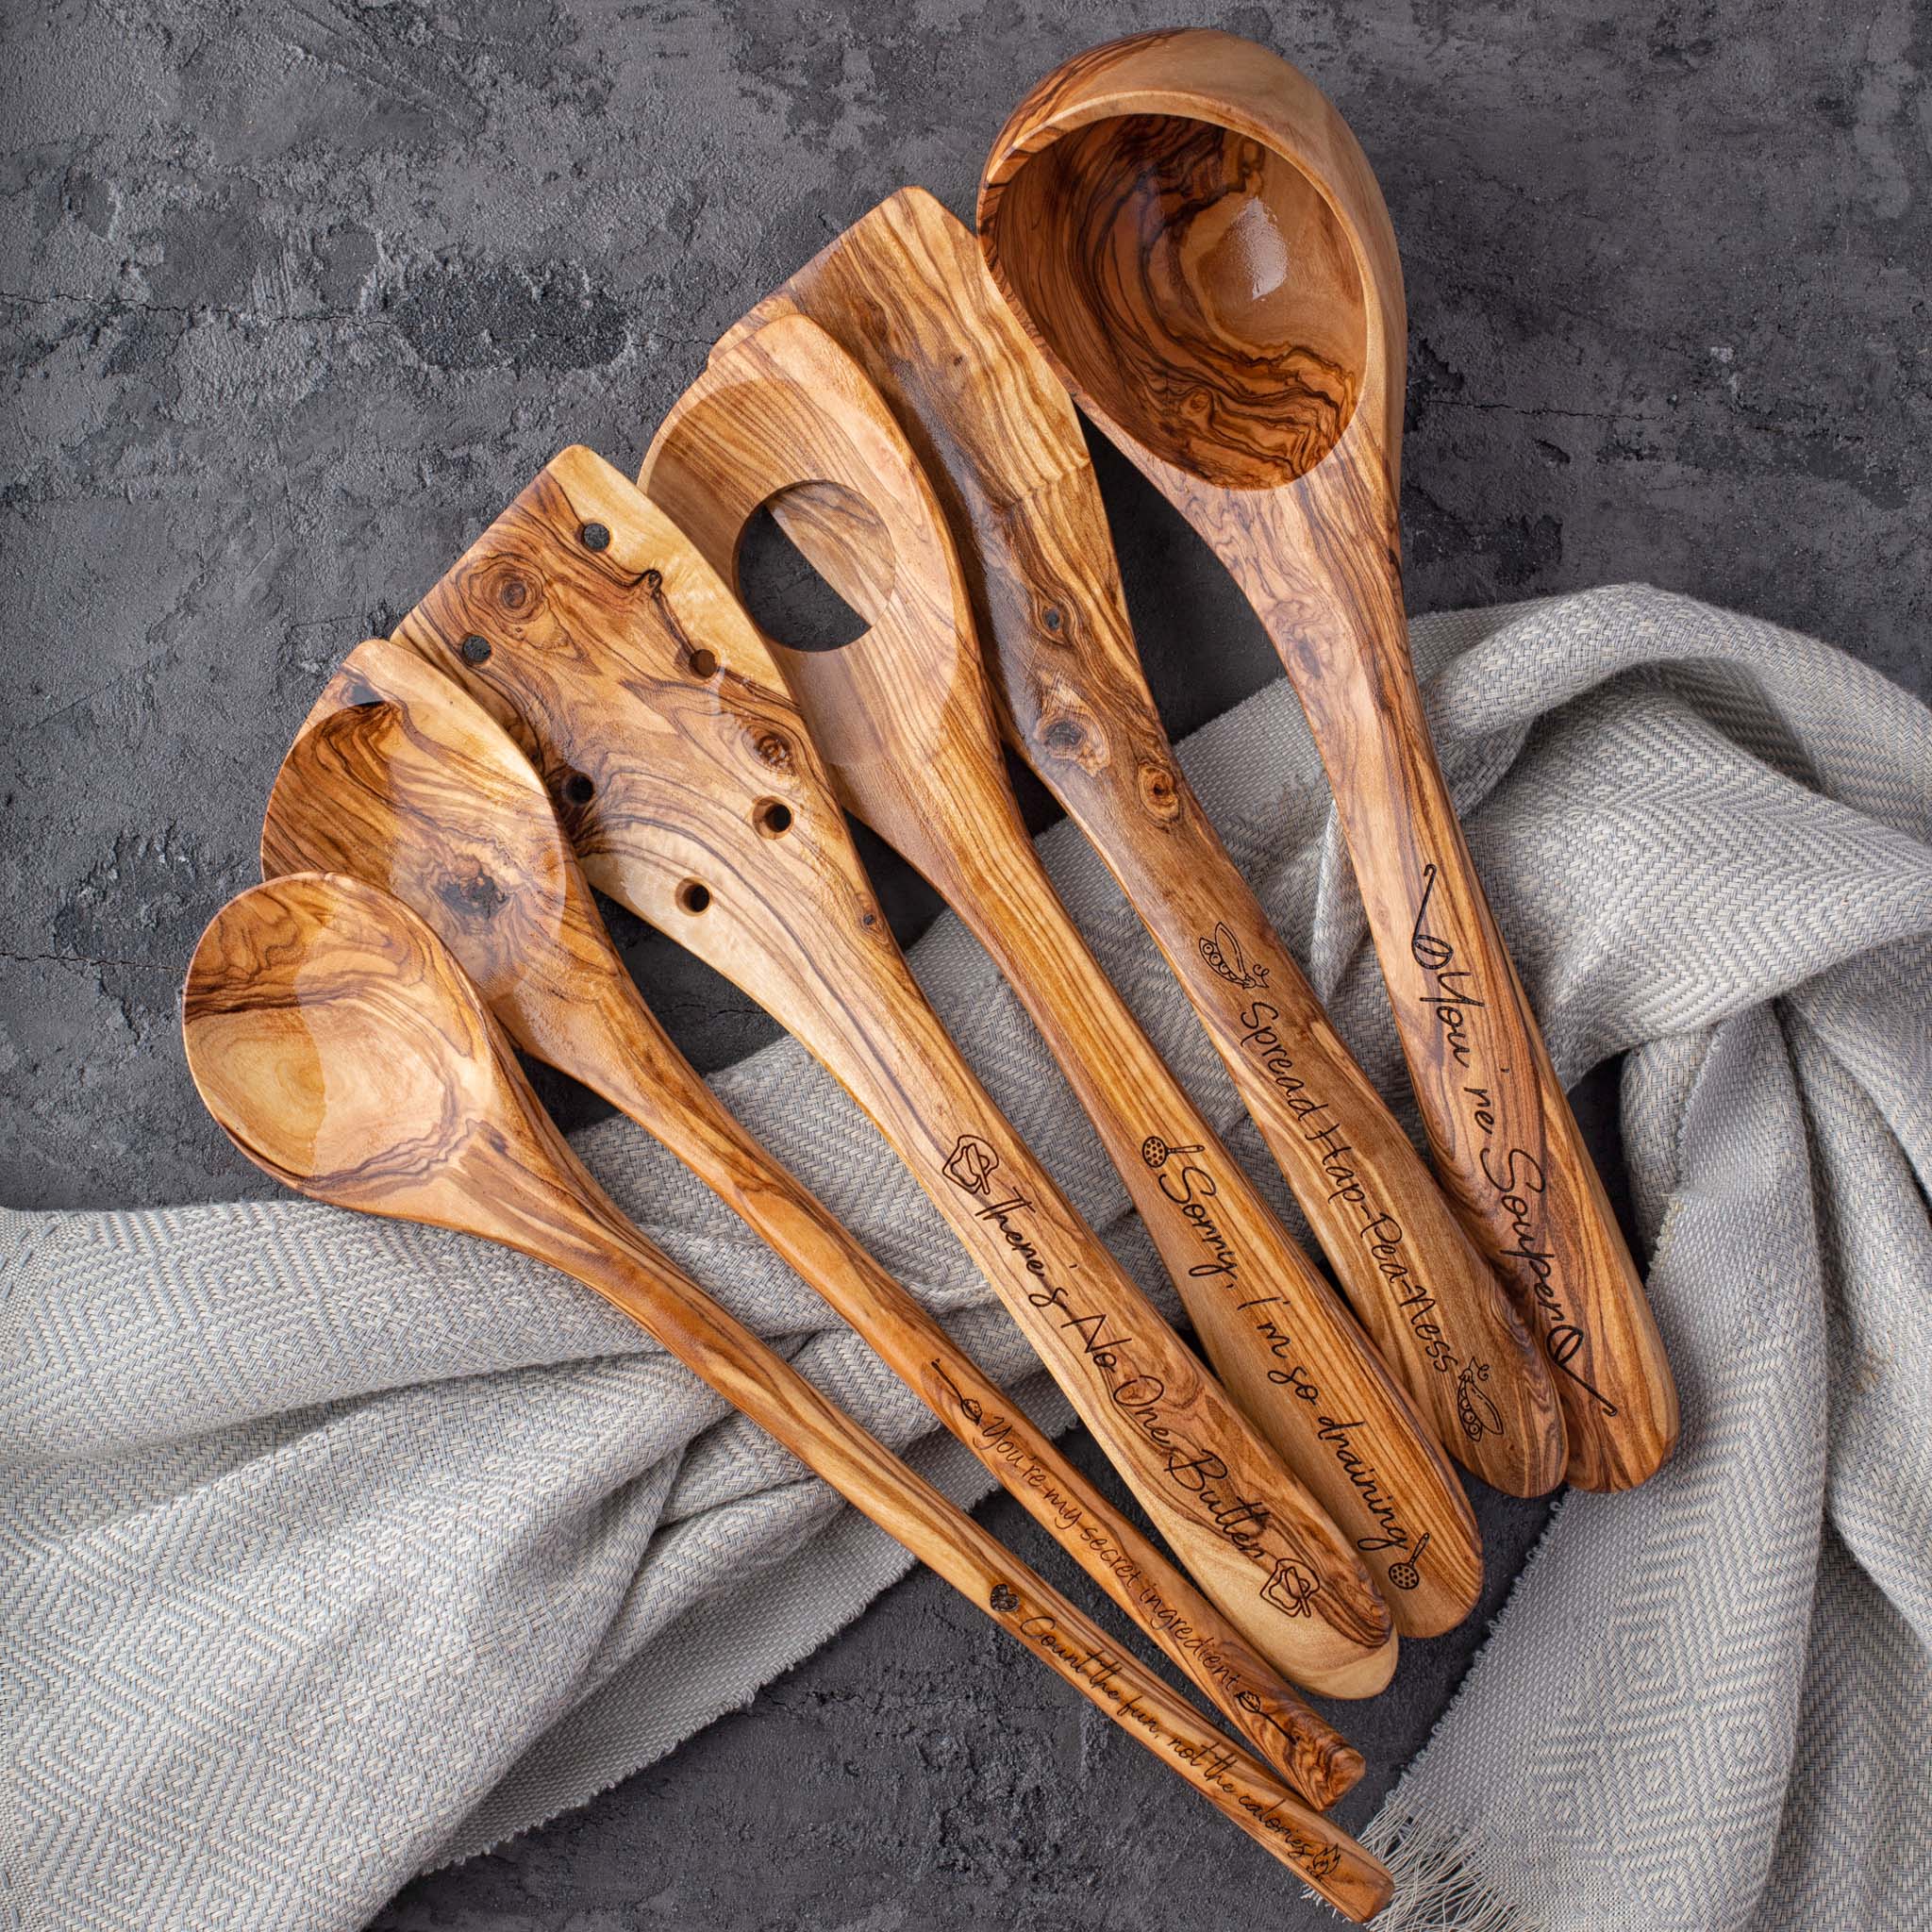 Custom Bamboo Kitchen Spoons (5 Pieces)